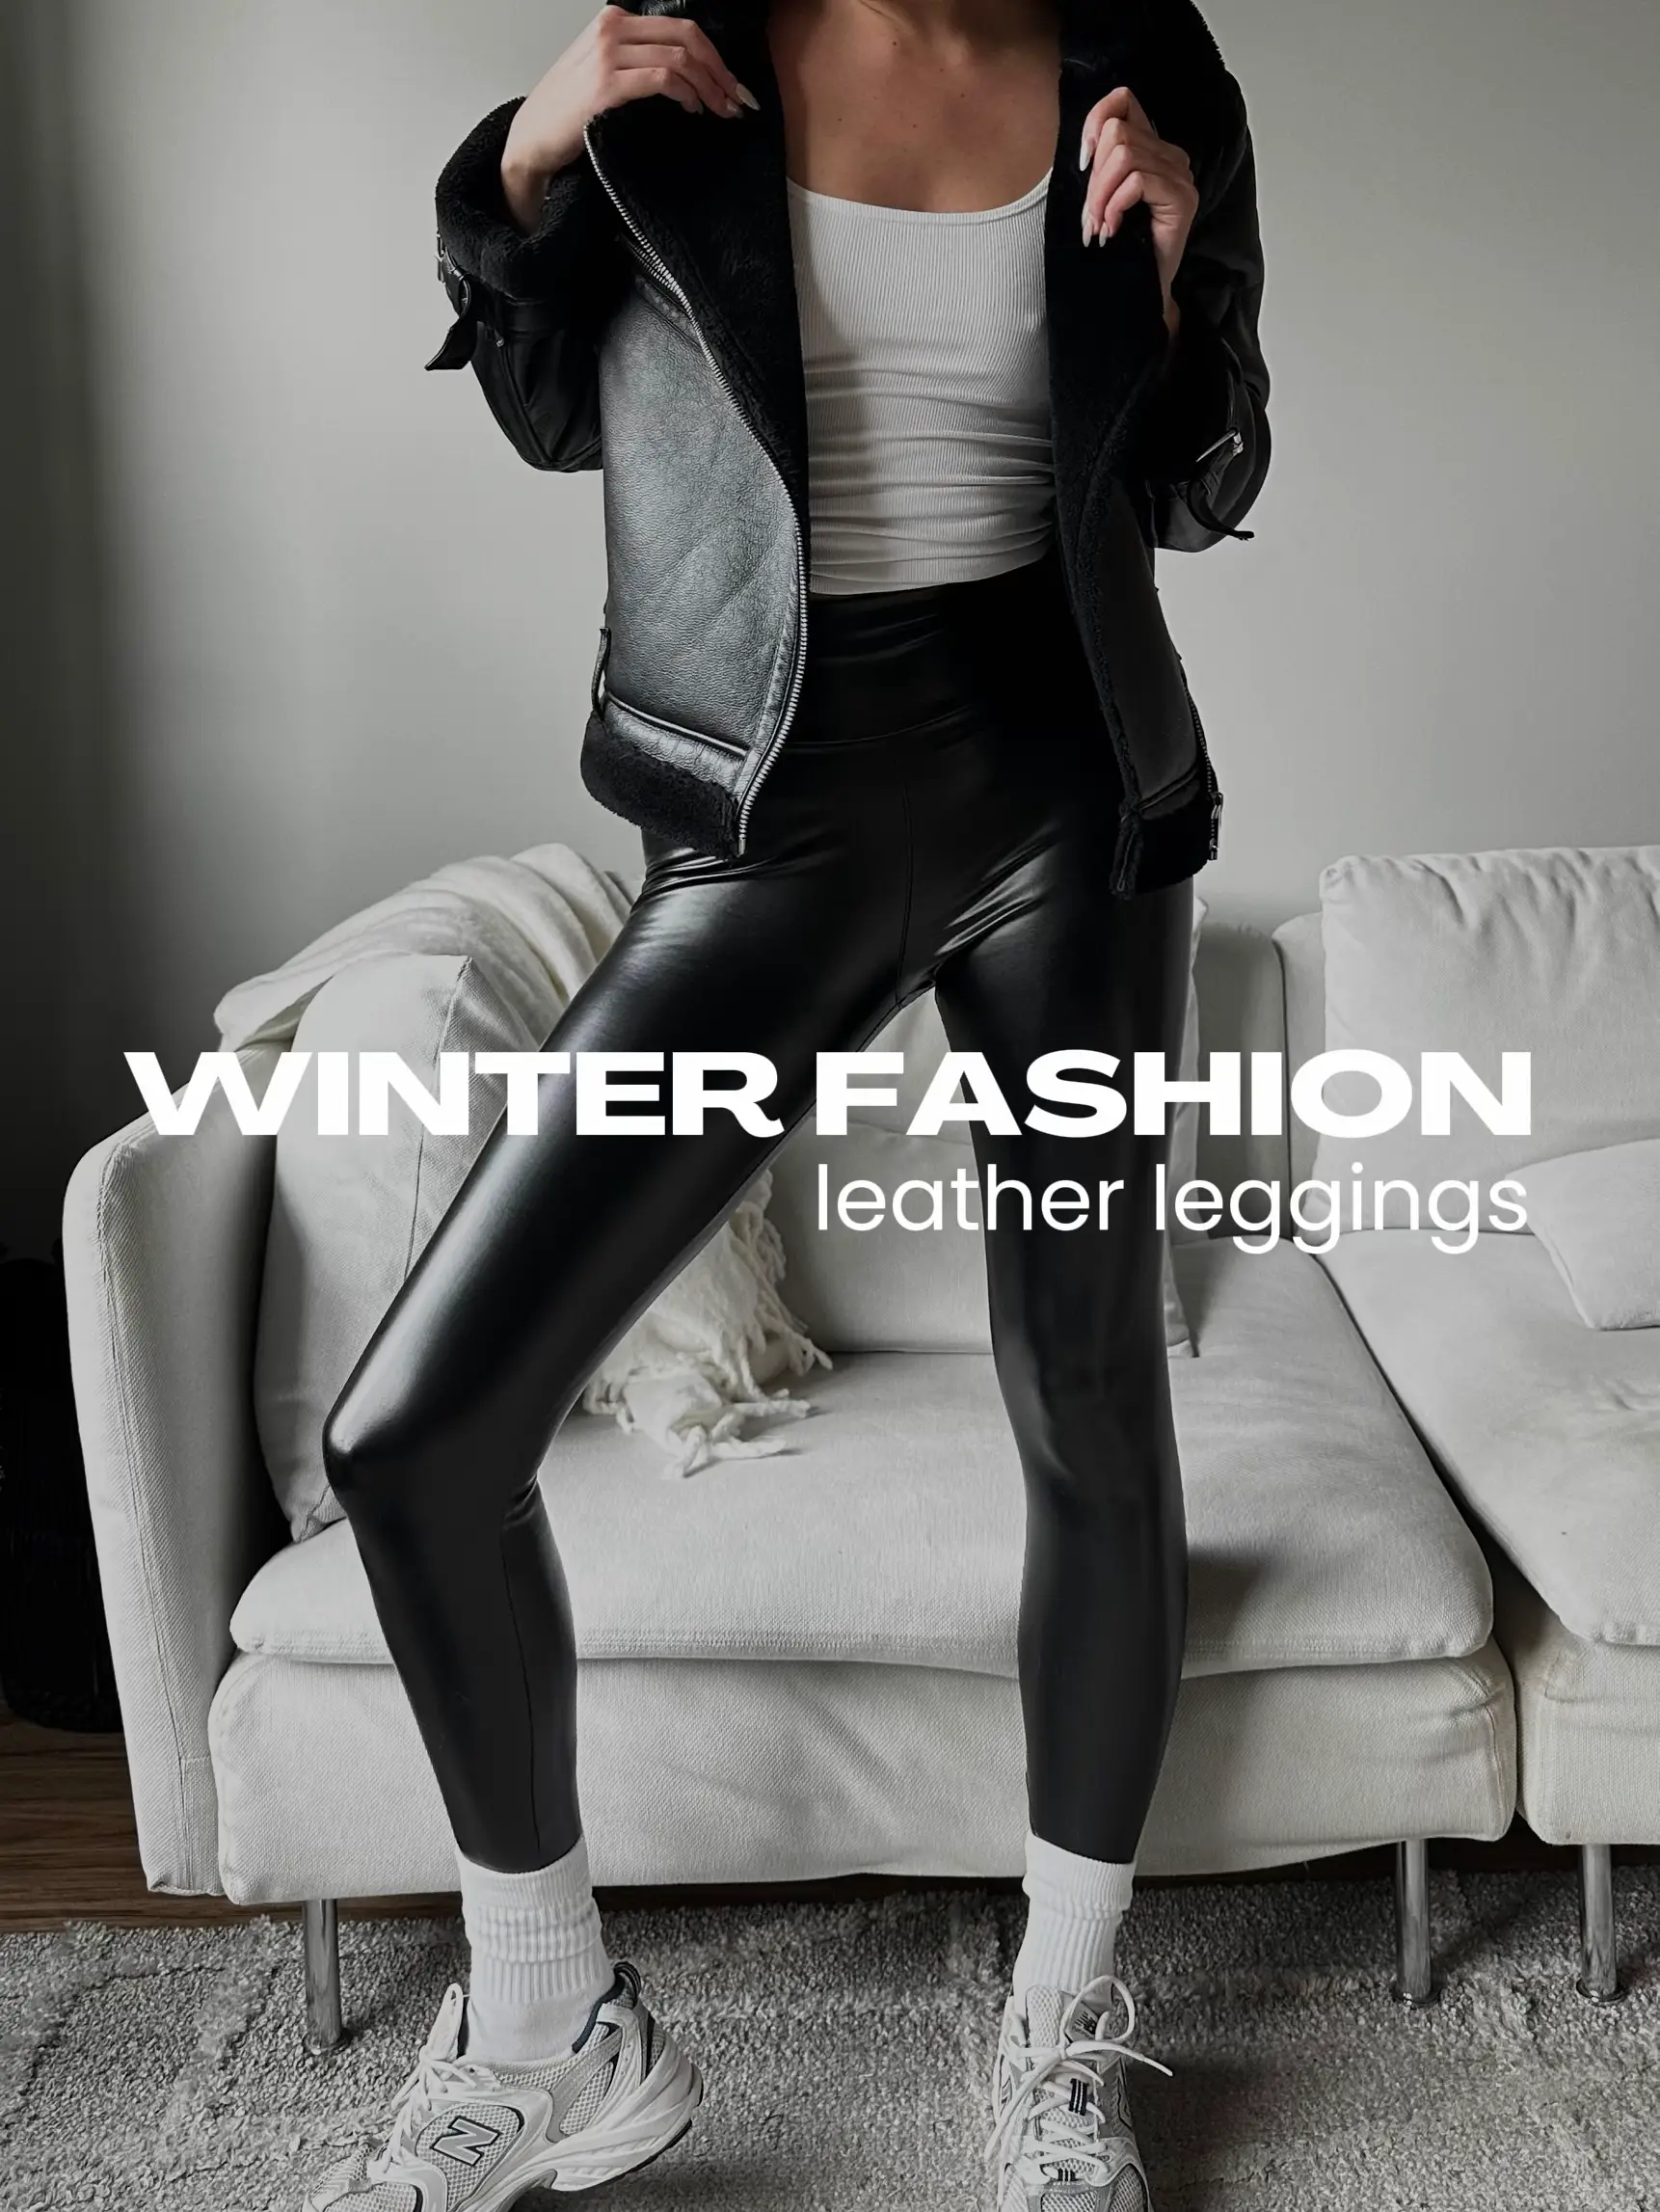 WINTER FASHION // LEATHER LEGGINGS, Gallery posted by jenny